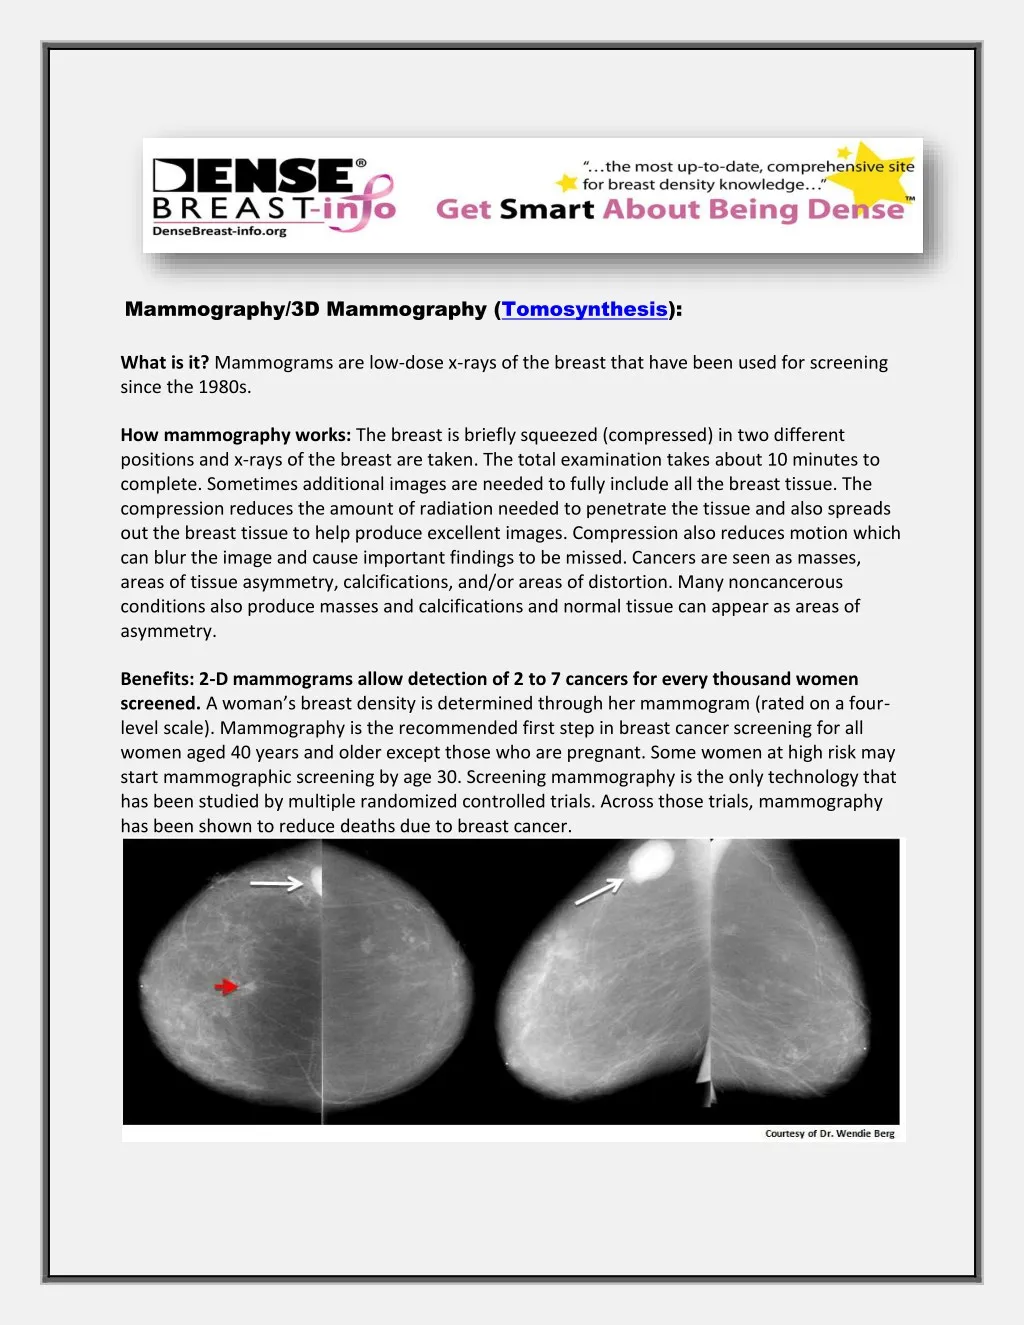 mammography 3d mammography tomosynthesis